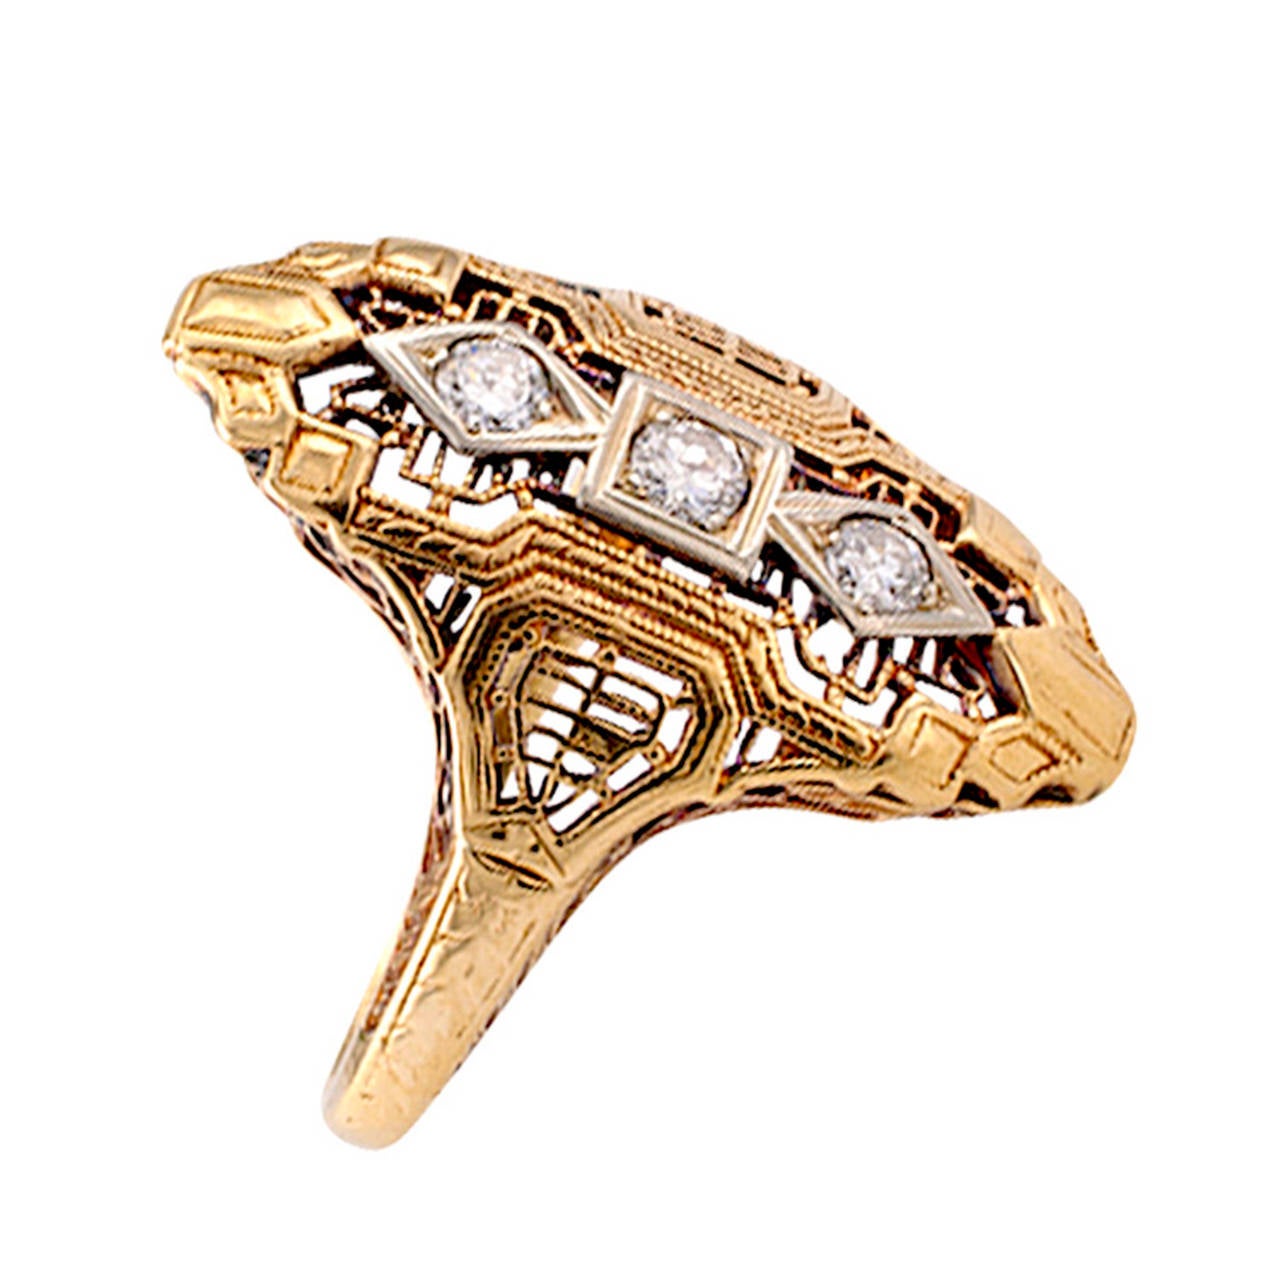 There is not a lot of authentic Art Deco jewelry in yellow gold. Circa 1930, this enticing dinner ring design is low profile and decorated with a lot of filigree, set with three circular-cut diamonds totaling approximately 0.25 carat, 14 karat gold,